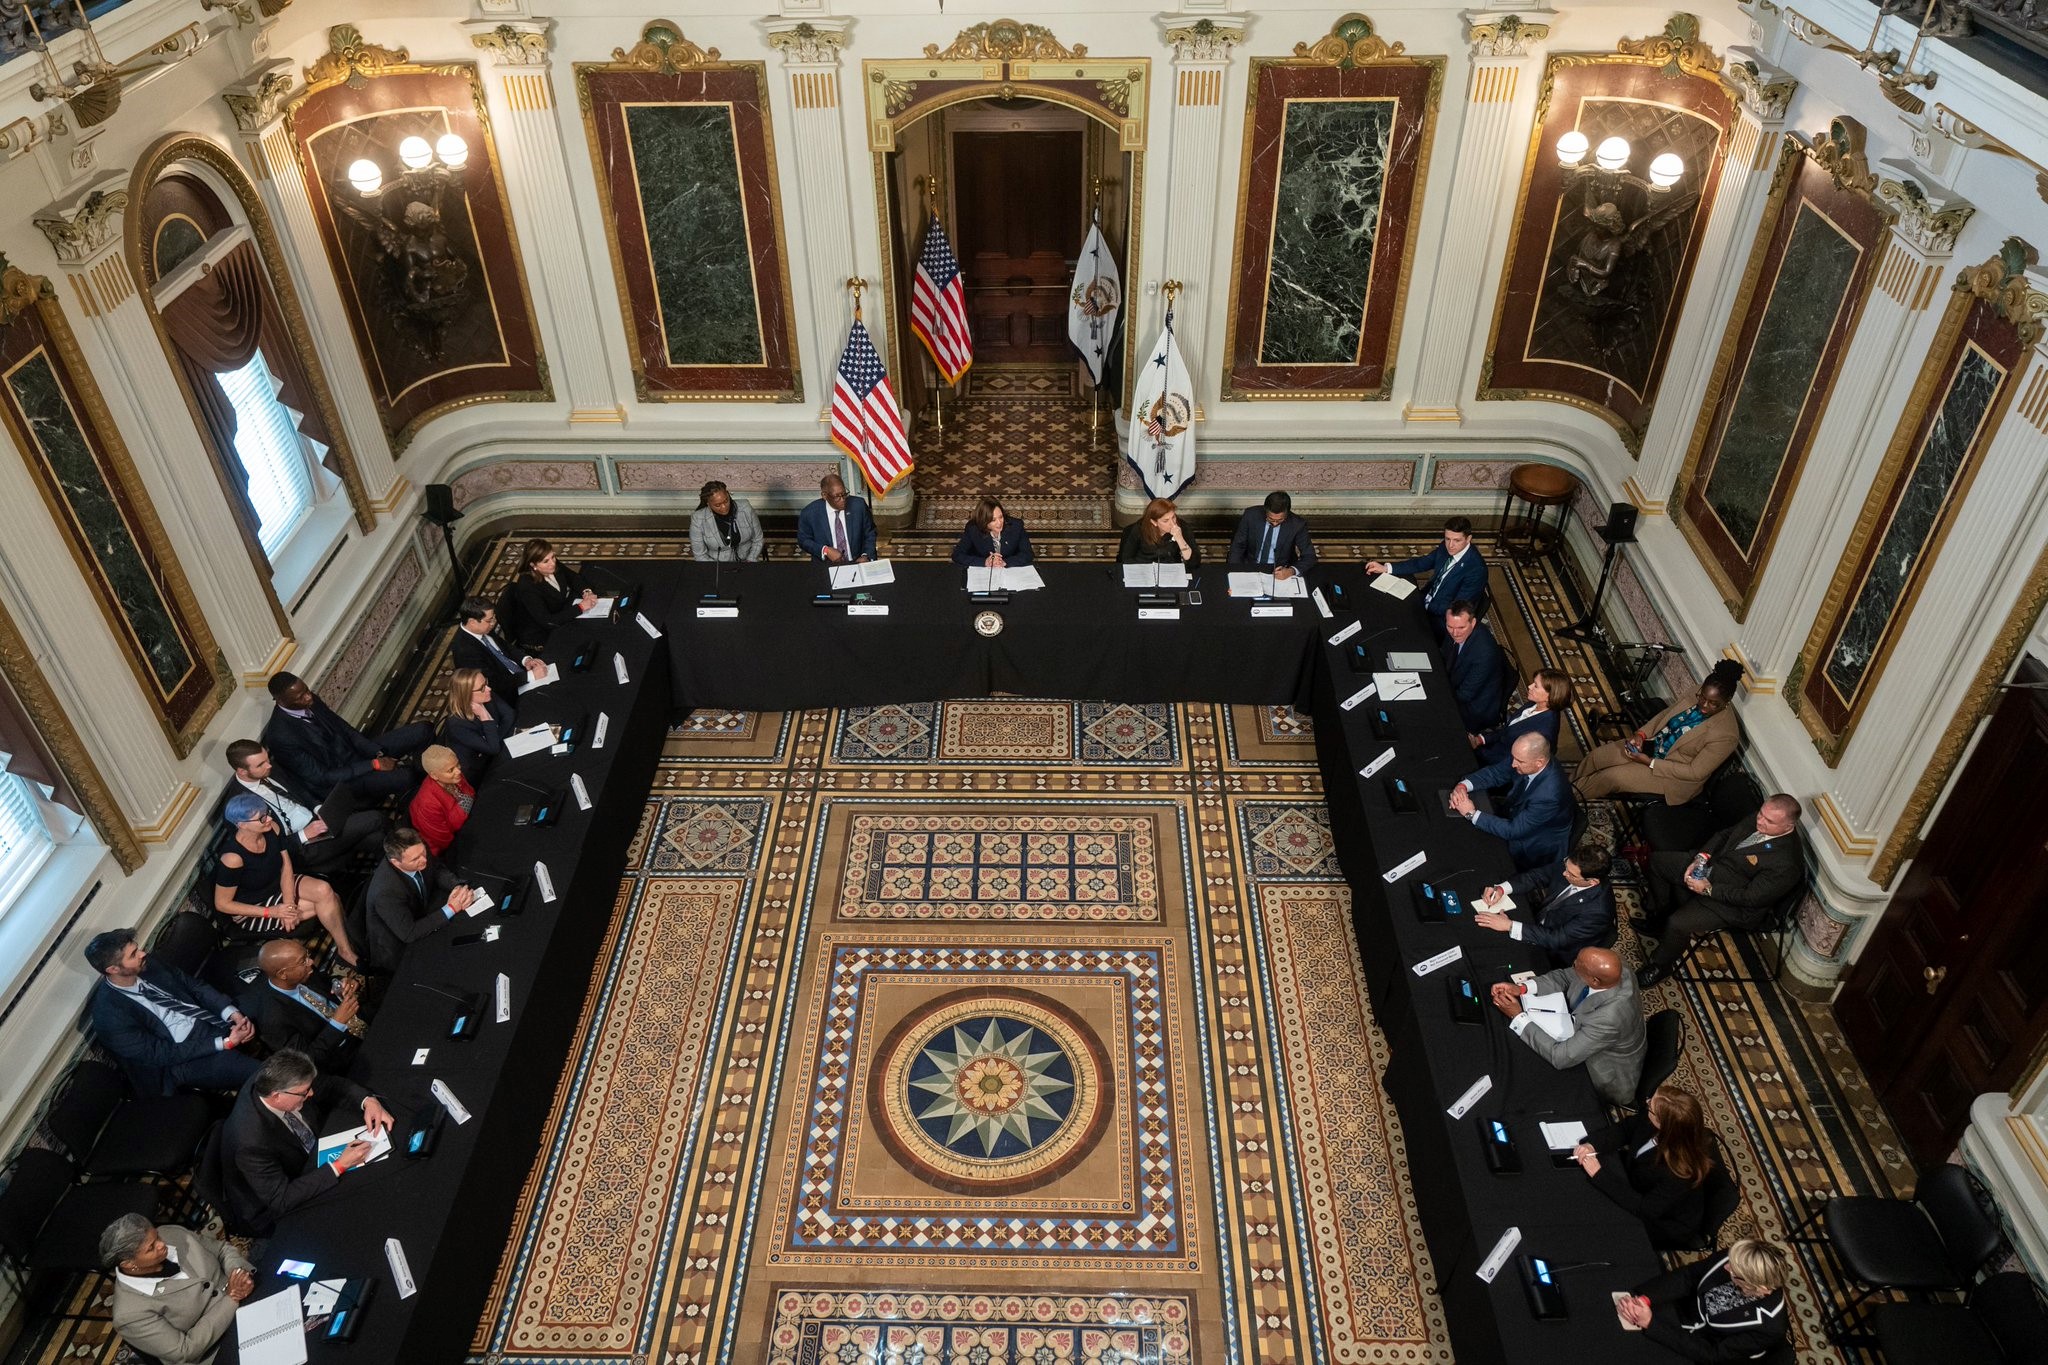 Image taken from a top down perspective of a U-shaped table at the White House with members of the Users' Advisory Group seated at it.